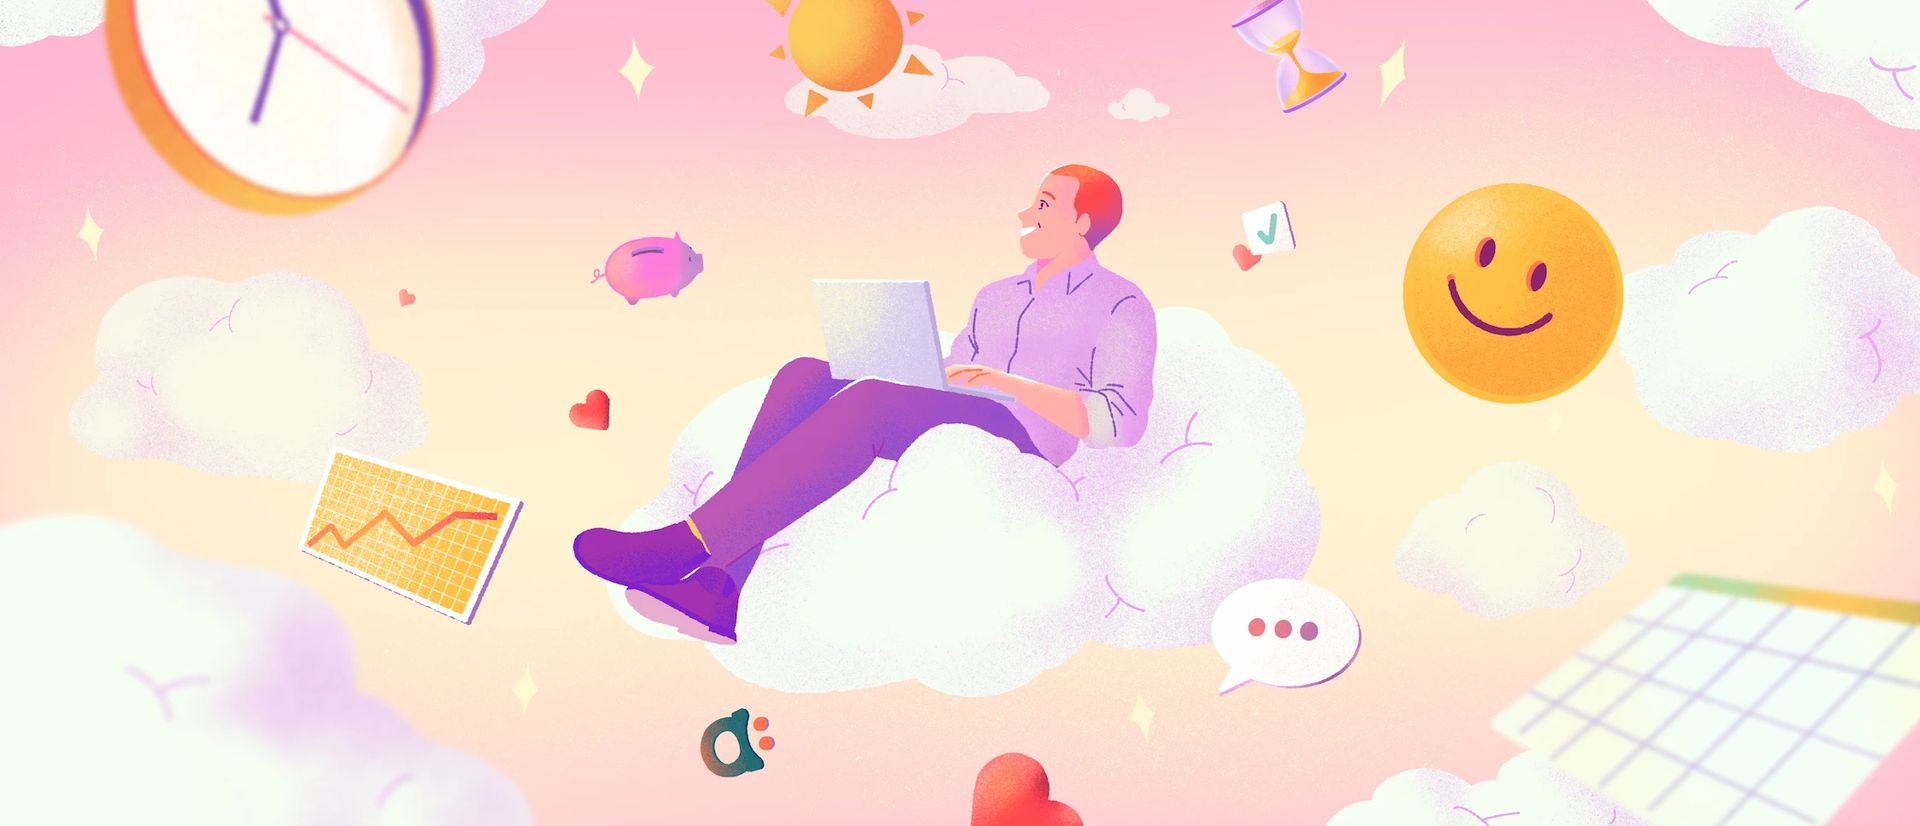 Man sitting on cloud with laptop on laps, surrounded by floating elements: clock, smiley, clouds, graphs